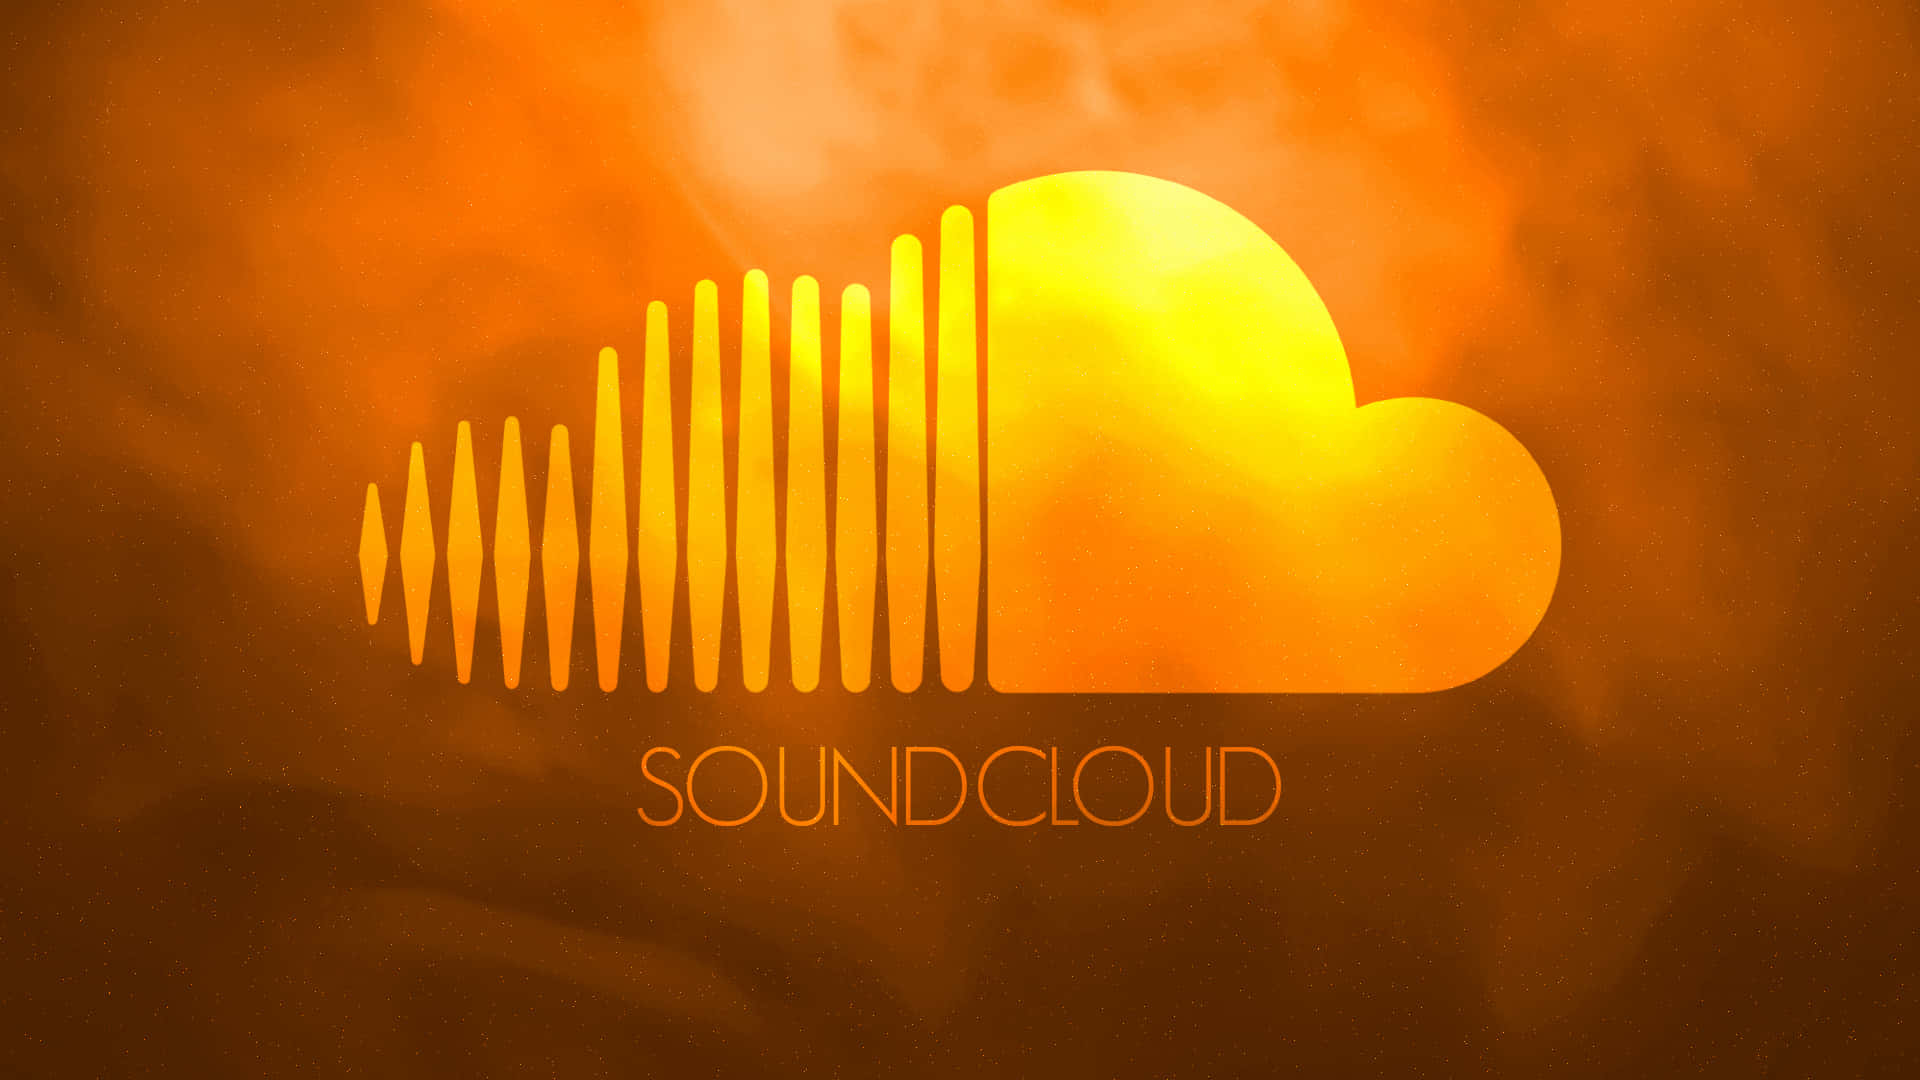 Listen to the best music on Soundcloud